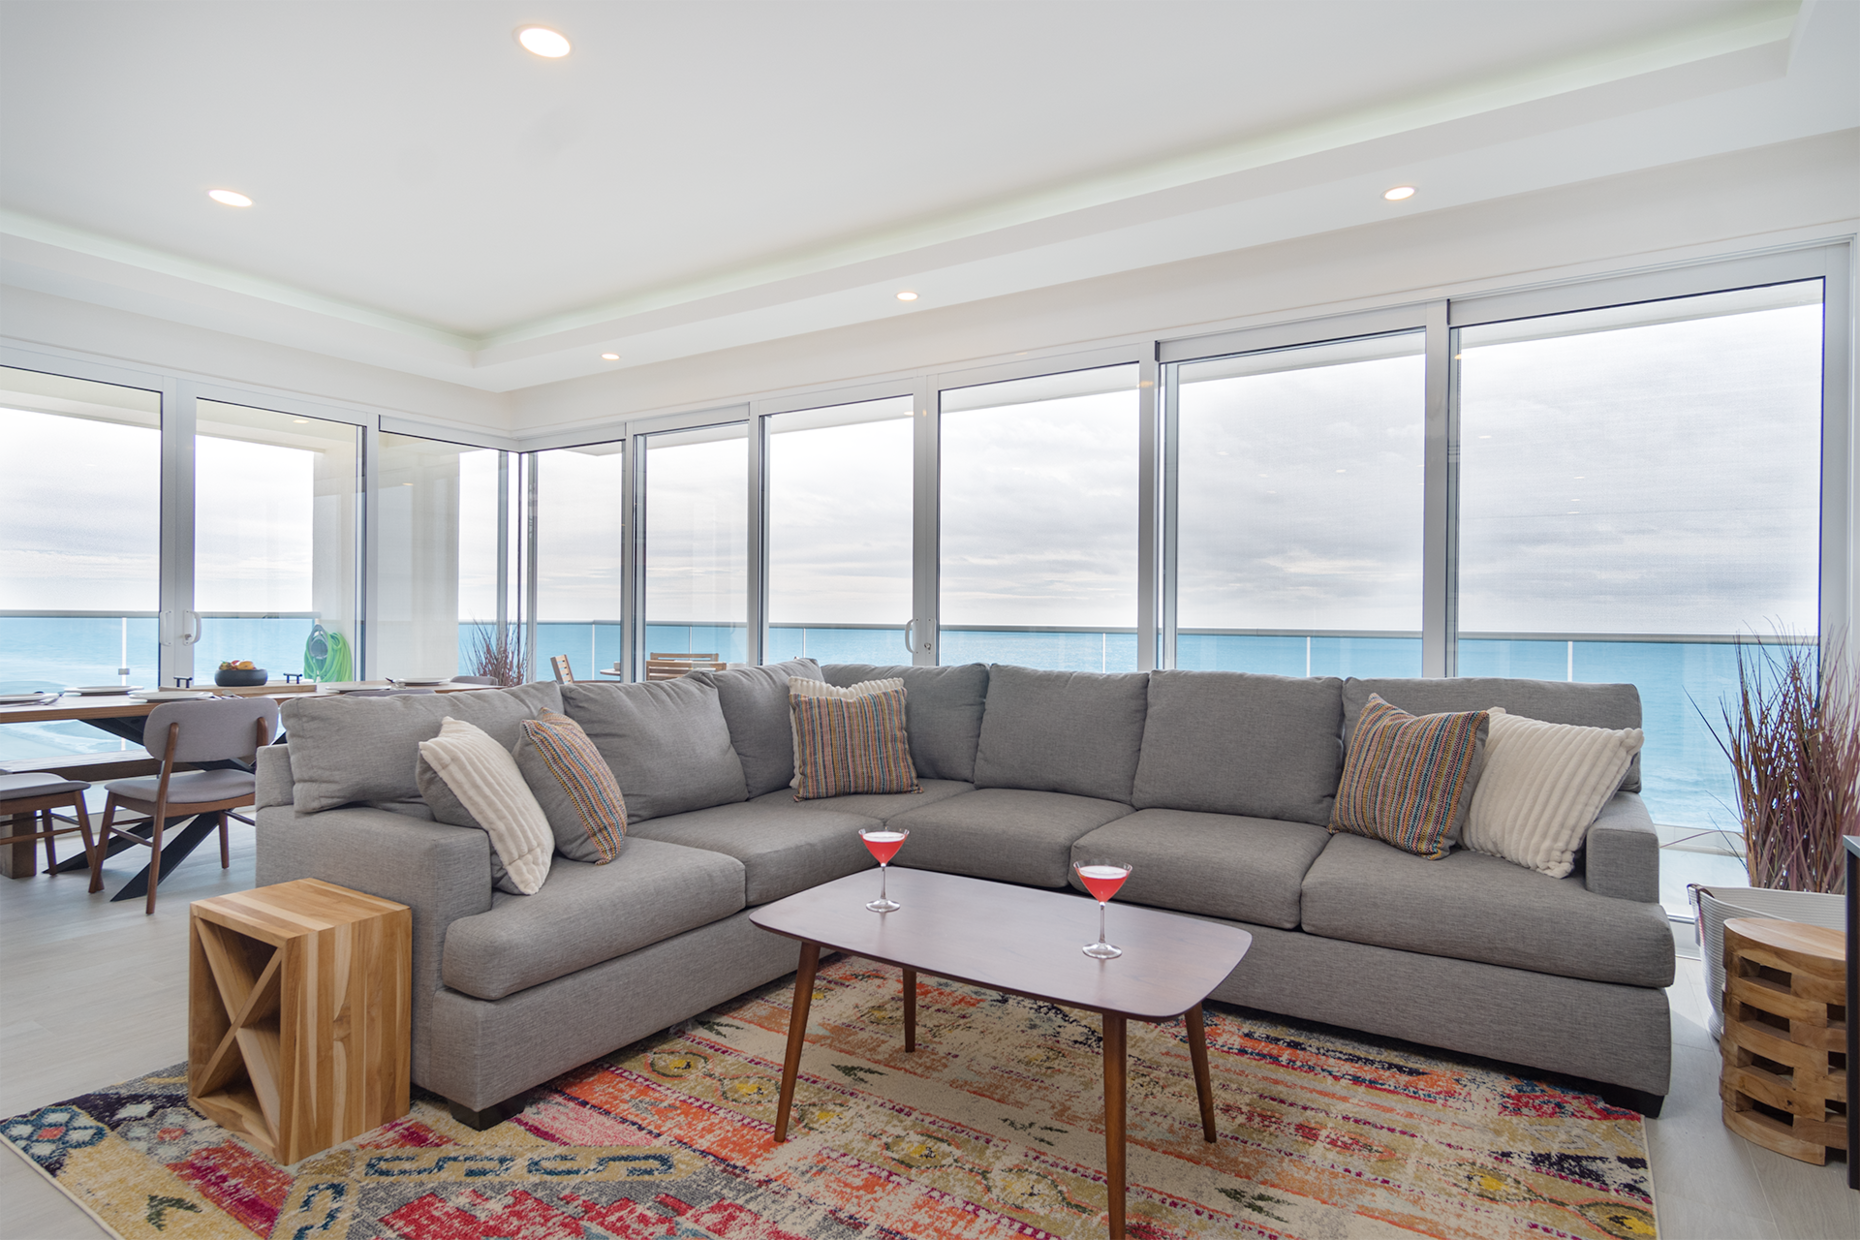 Living room and expansive views.